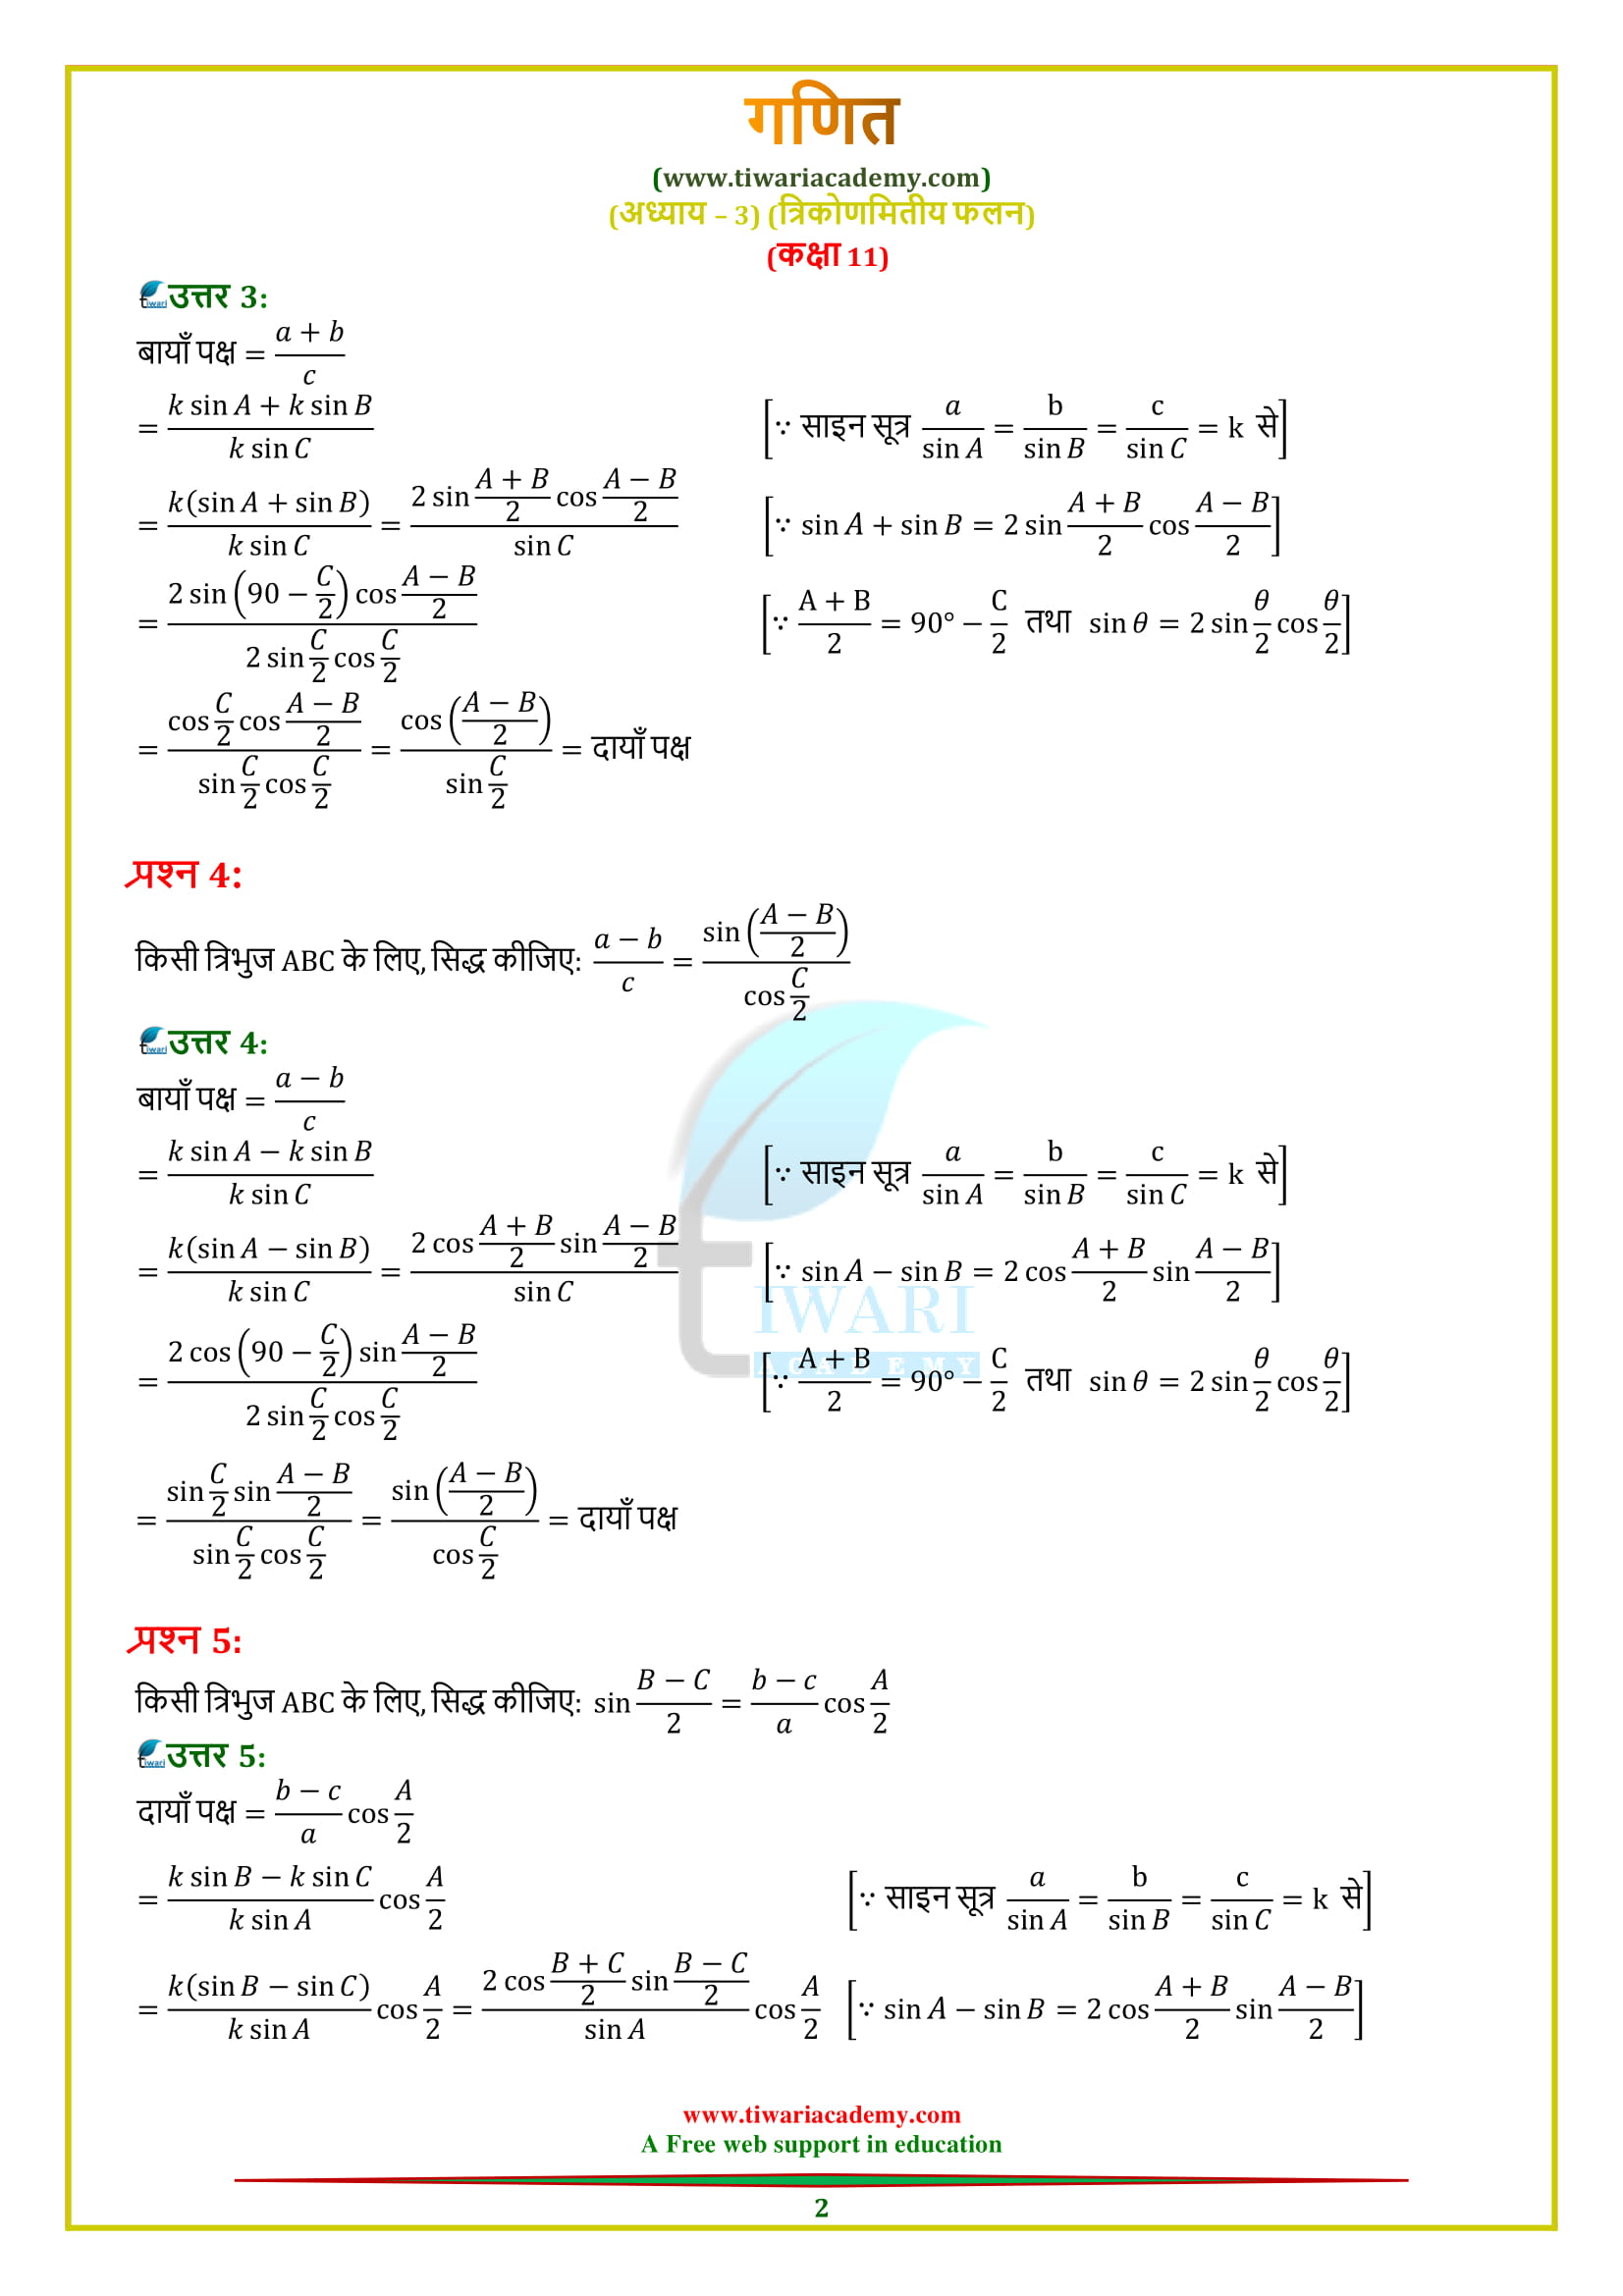 11 Maths Chapter 3 Exercise 3.5 in Hindi for 2018-19.